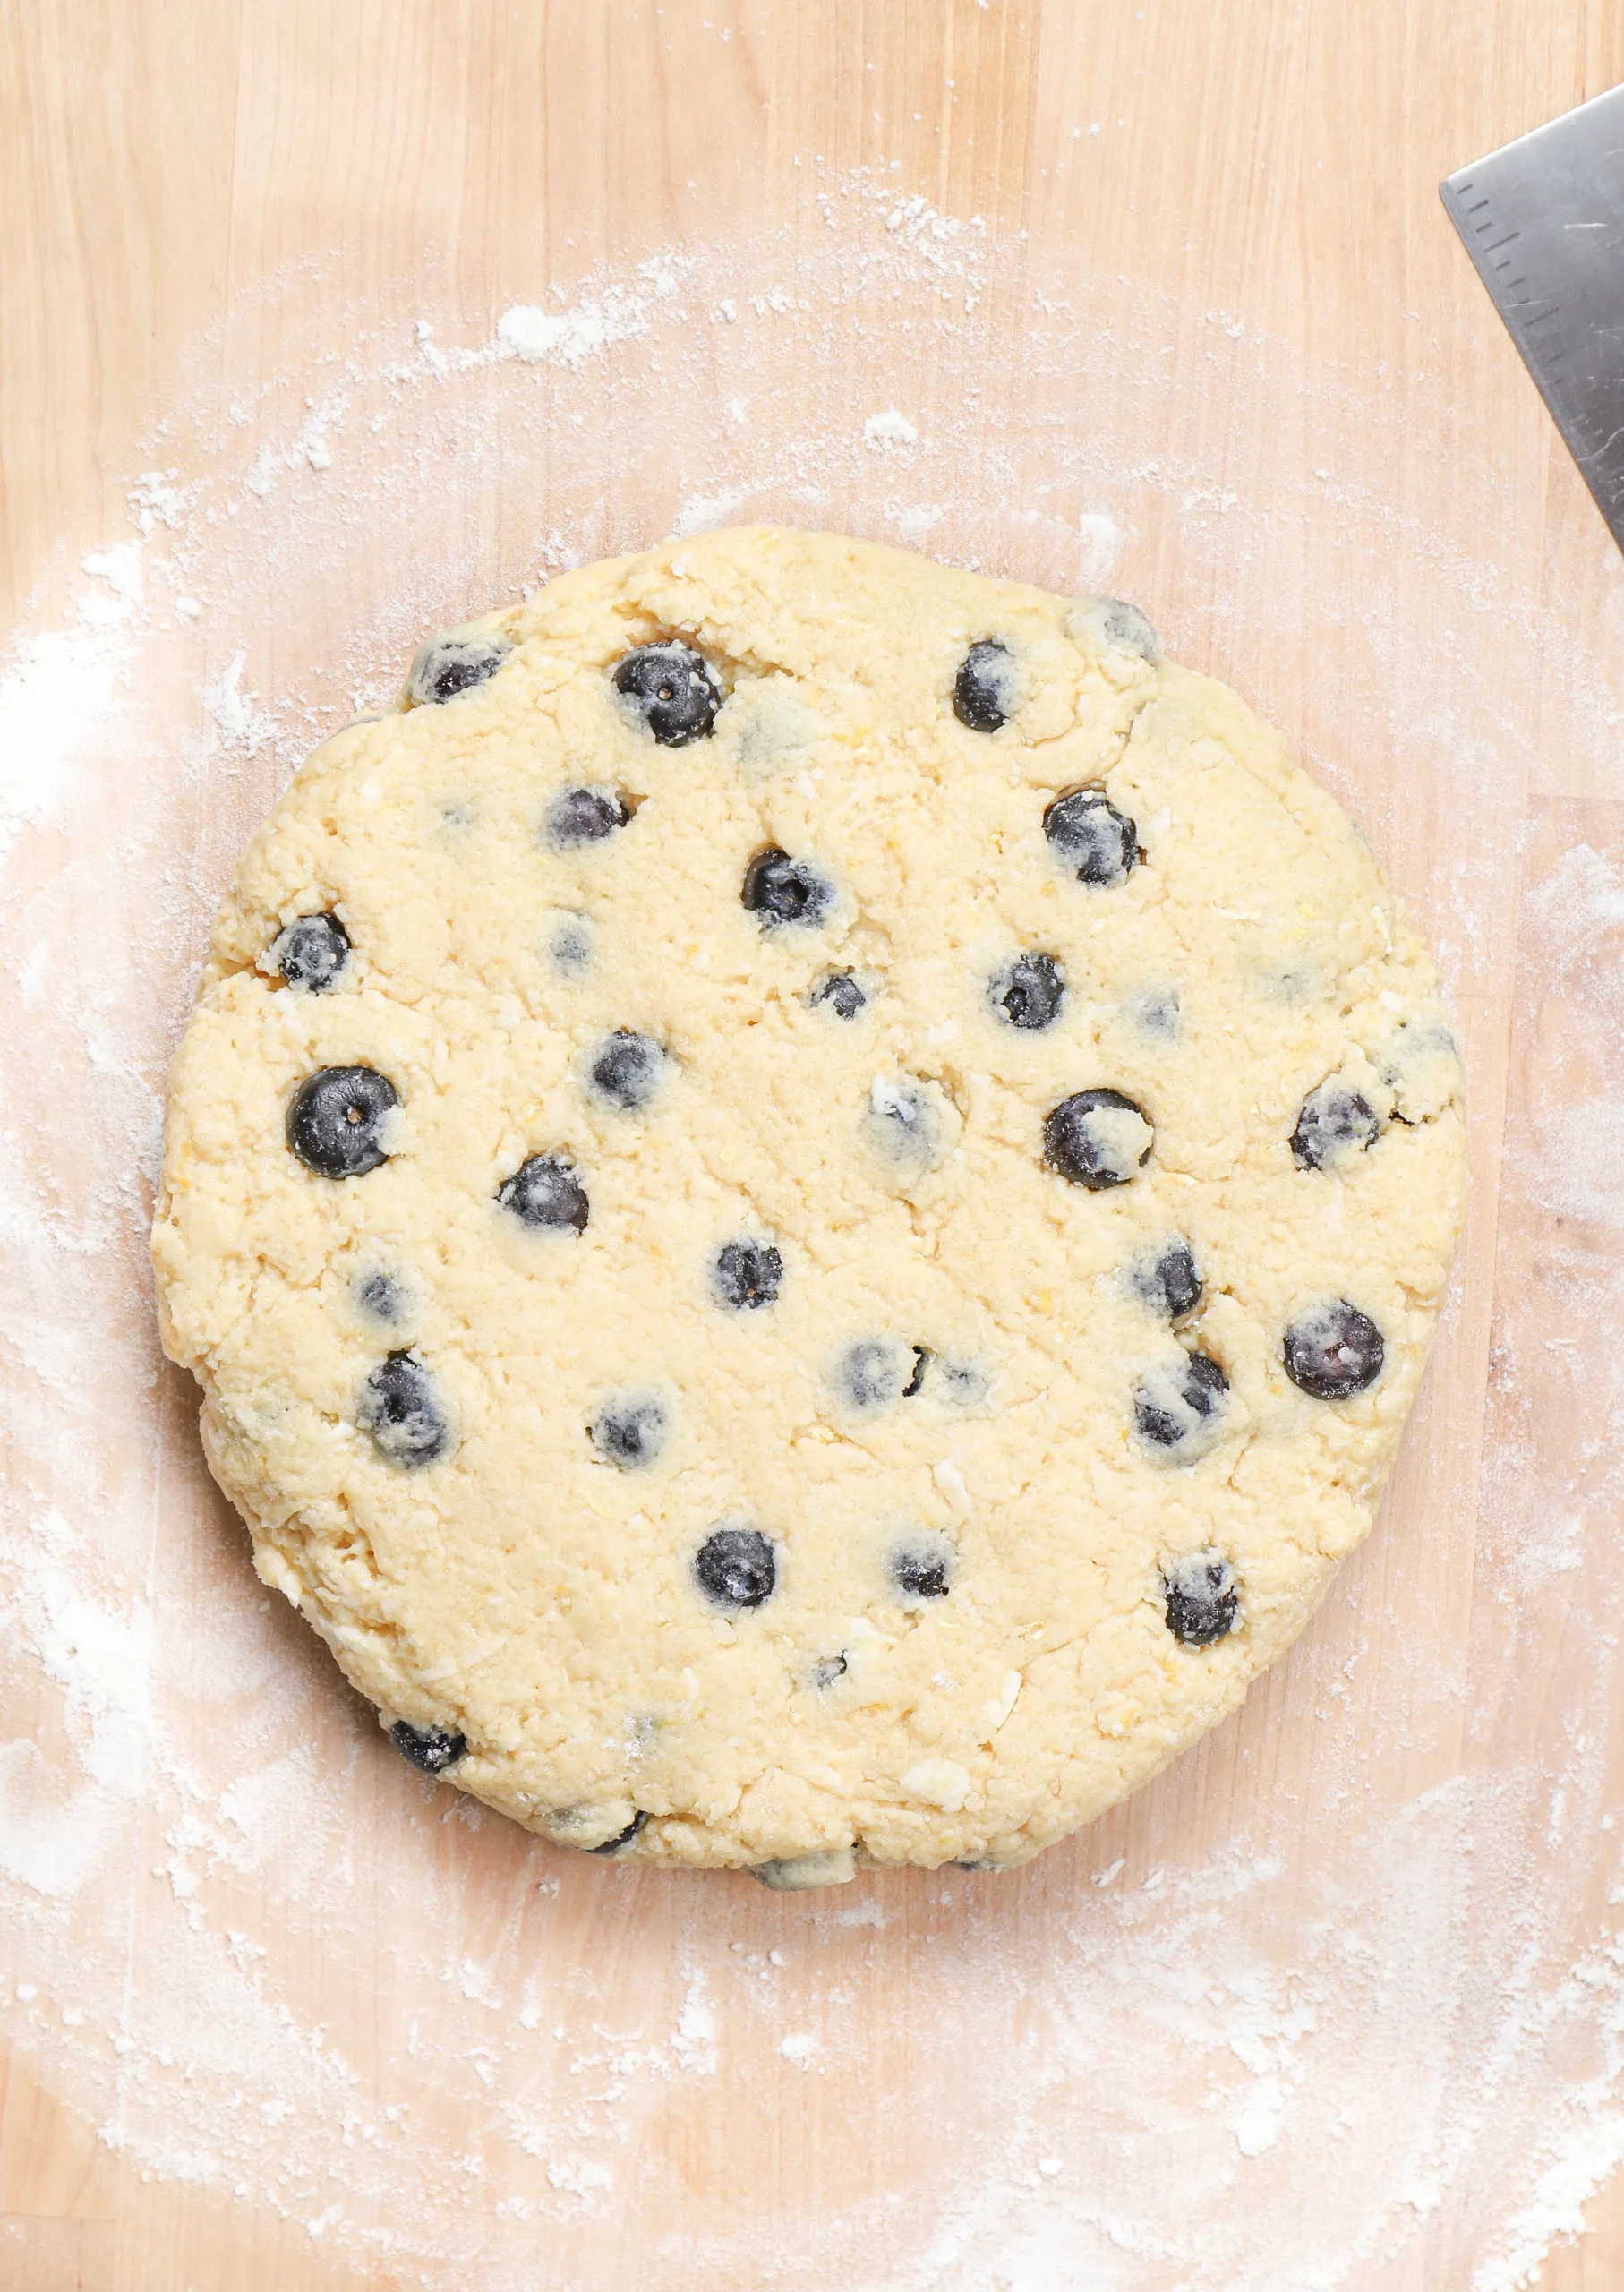 Overhead view of the lemon blueberry scone dough in a circle on a butcher block countertop.